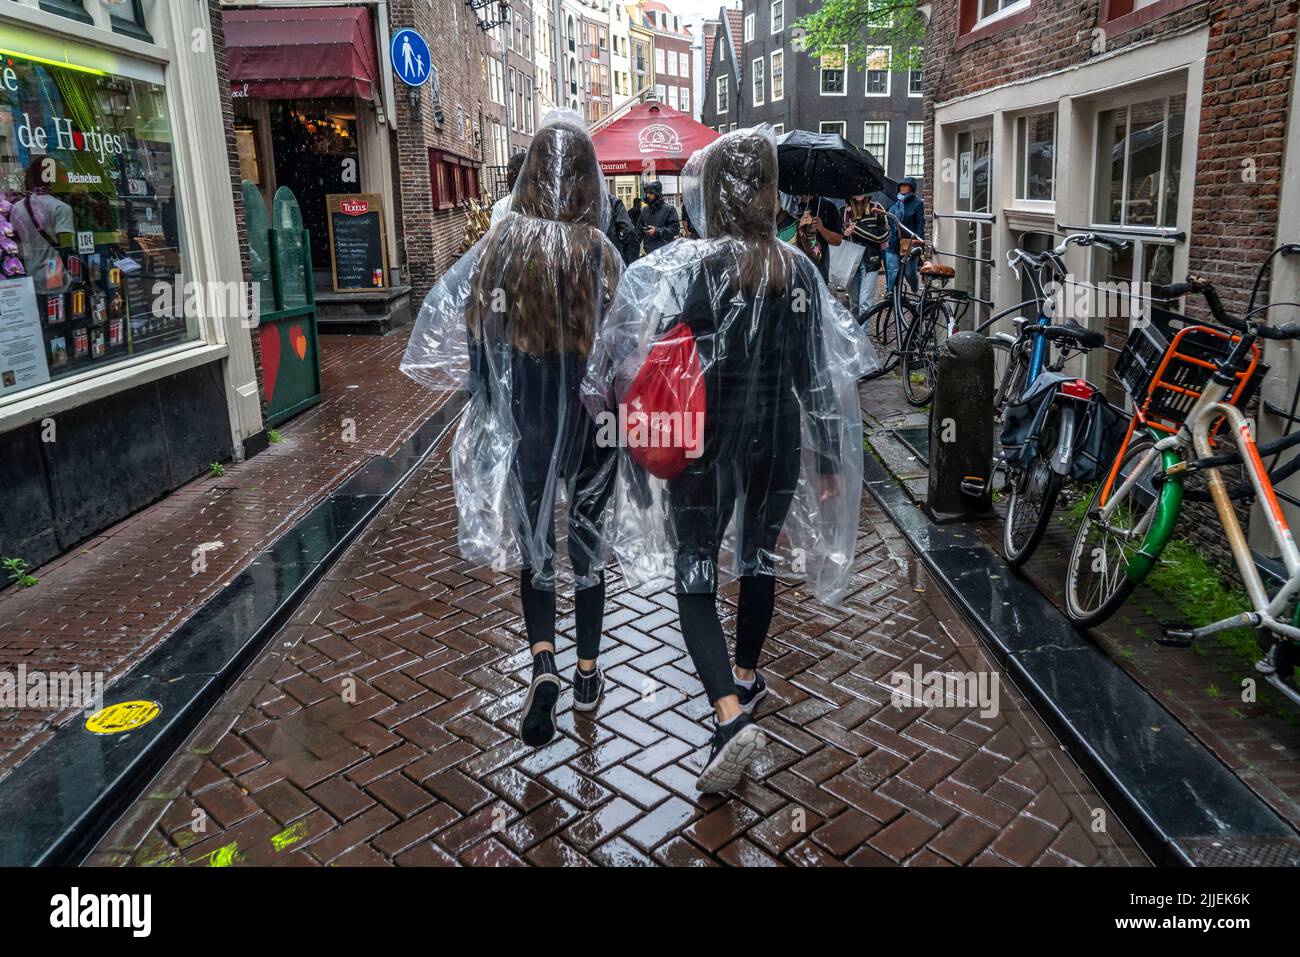 Tourists in rainy weather, wearing plastic ponchos, in the old town of Amsterdam, Netherlands. Stock Photo